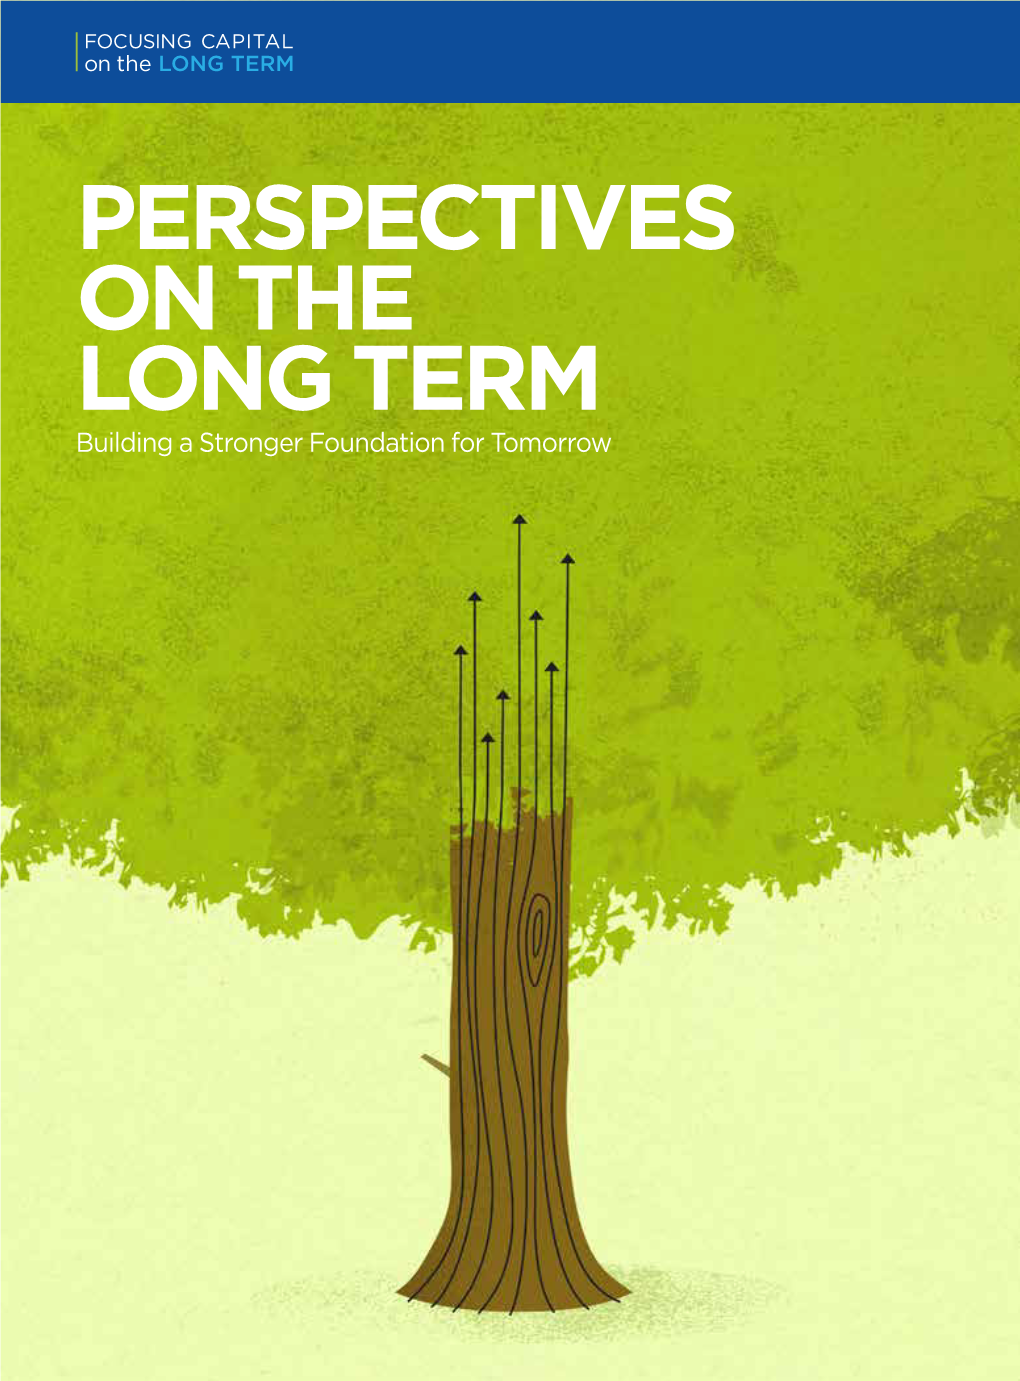 PERSPECTIVES on the LONG TERM Building a Stronger Foundation for Tomorrow PERSPECTIVES on the LONG TERM Building a Stronger Foundation for Tomorrow